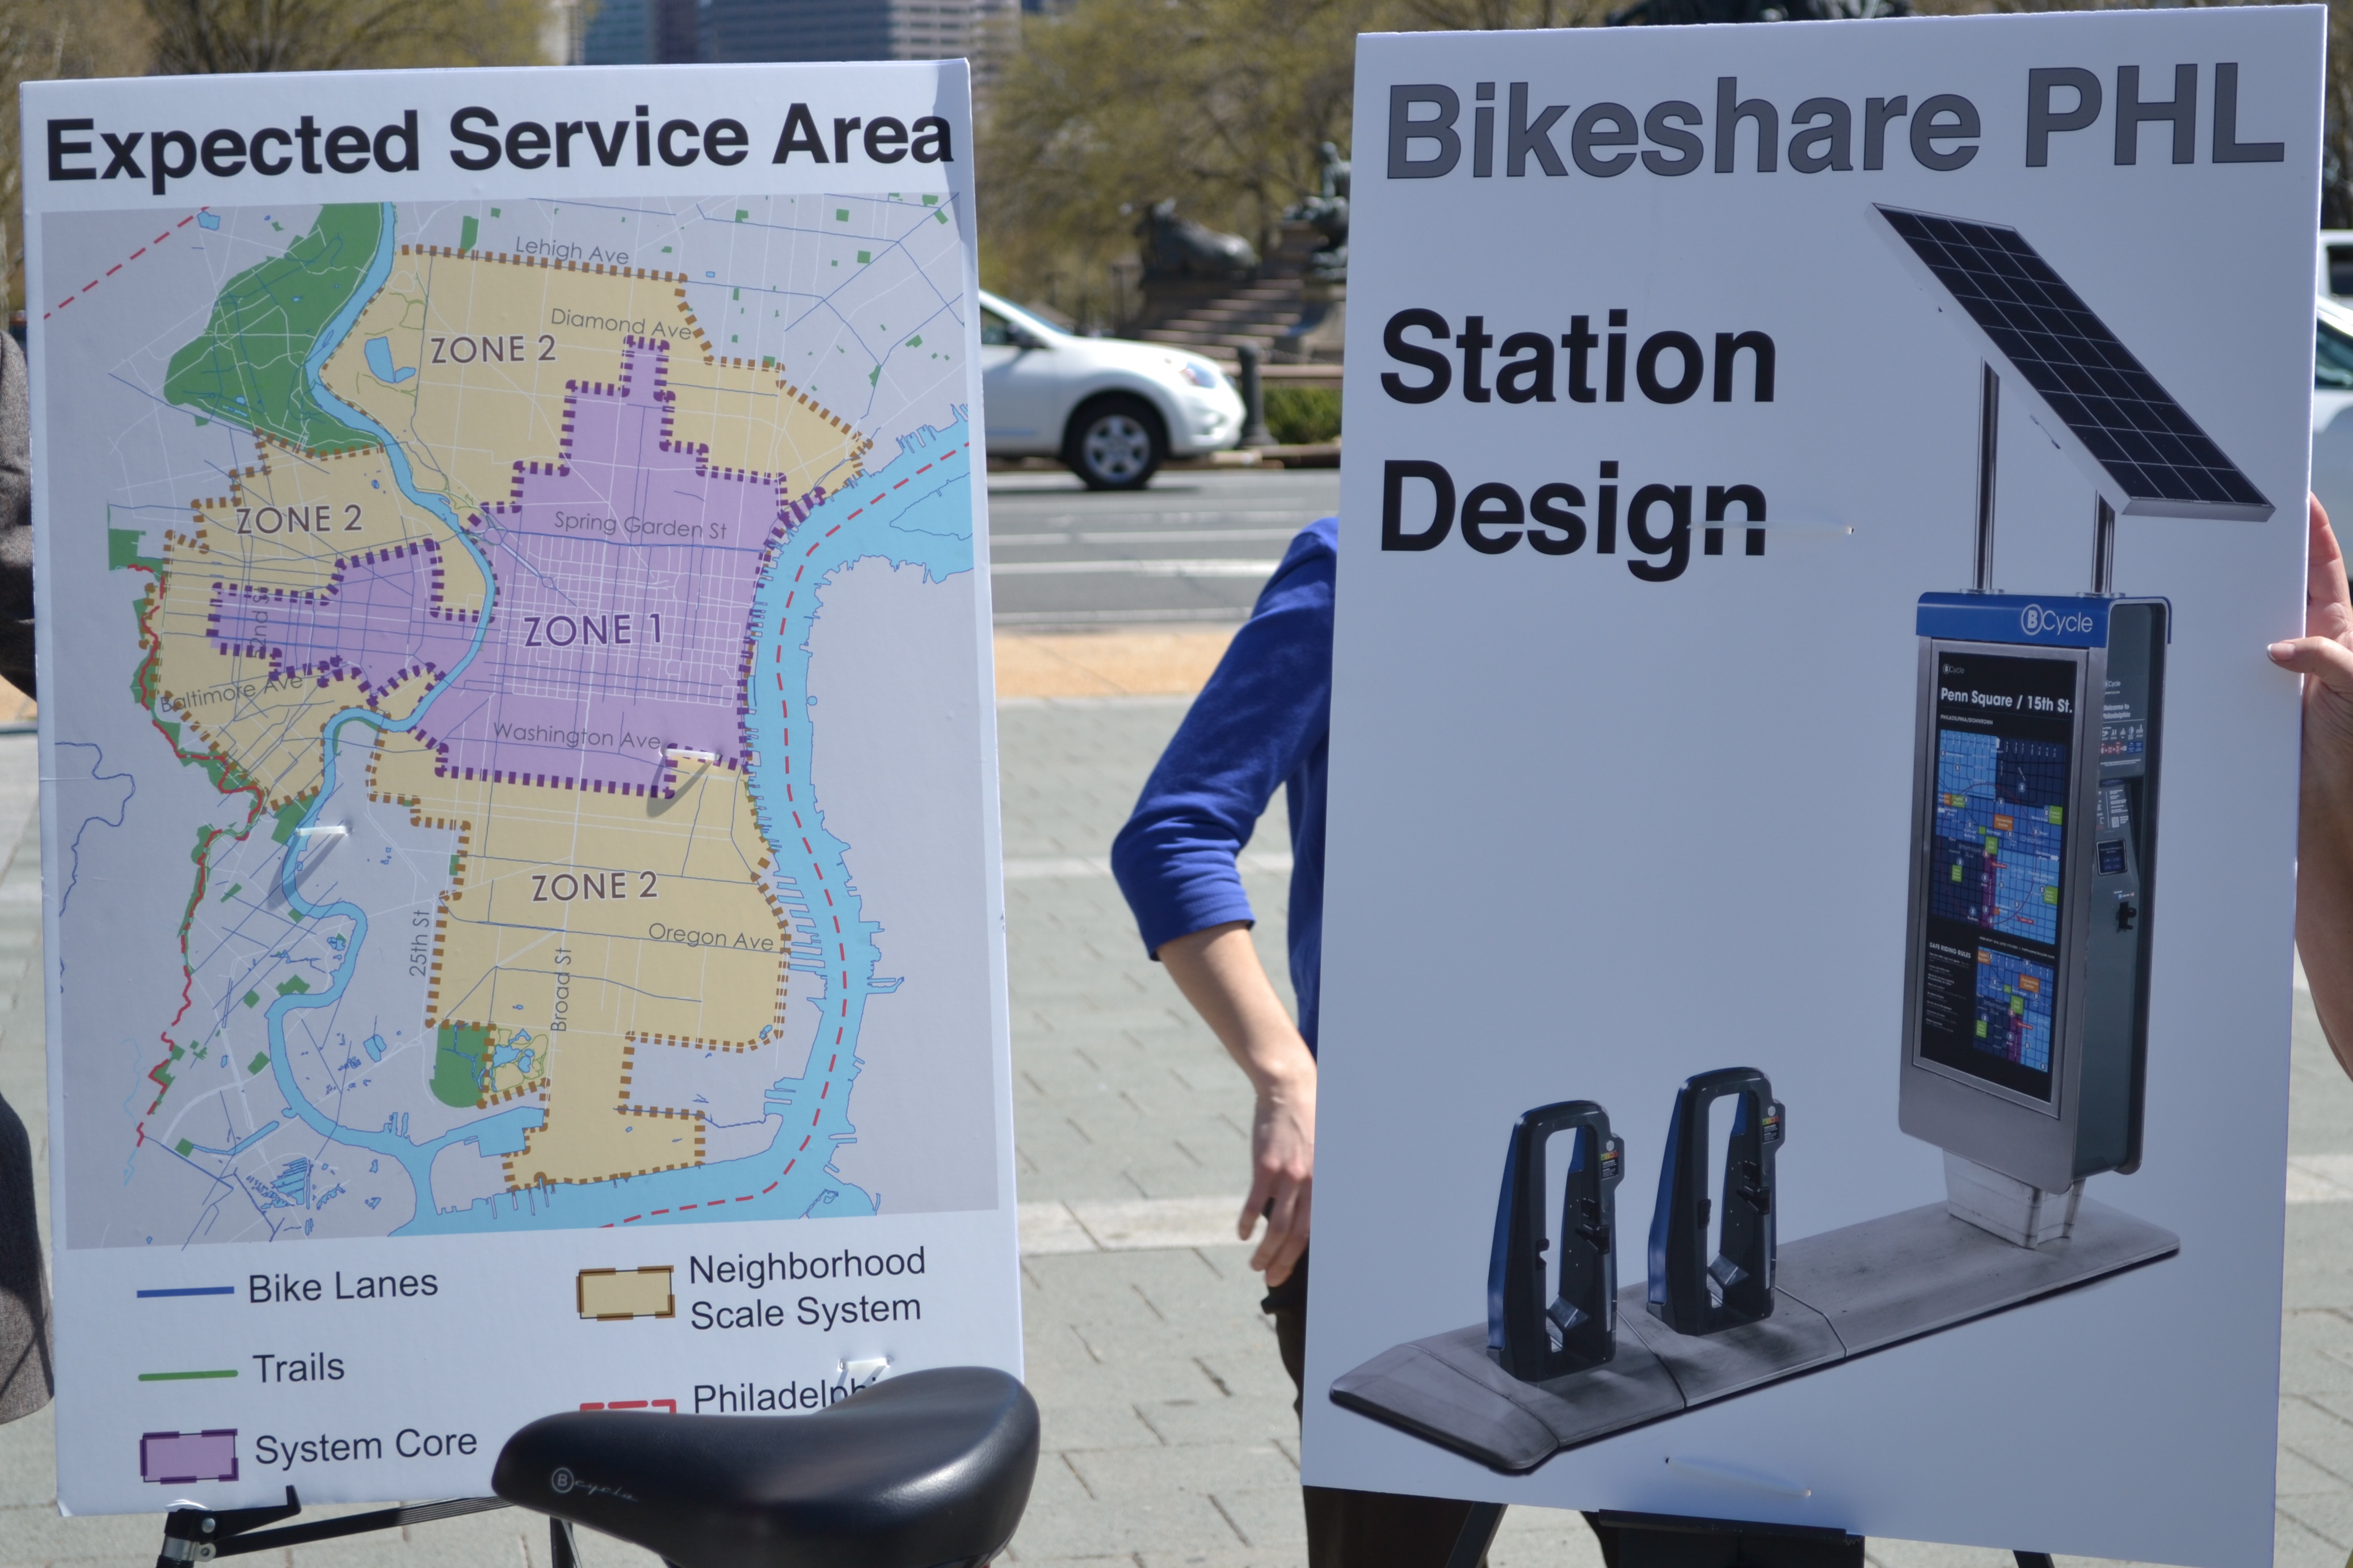 The bike share stations will be solar powered with an option to plug into an outlet if necessary